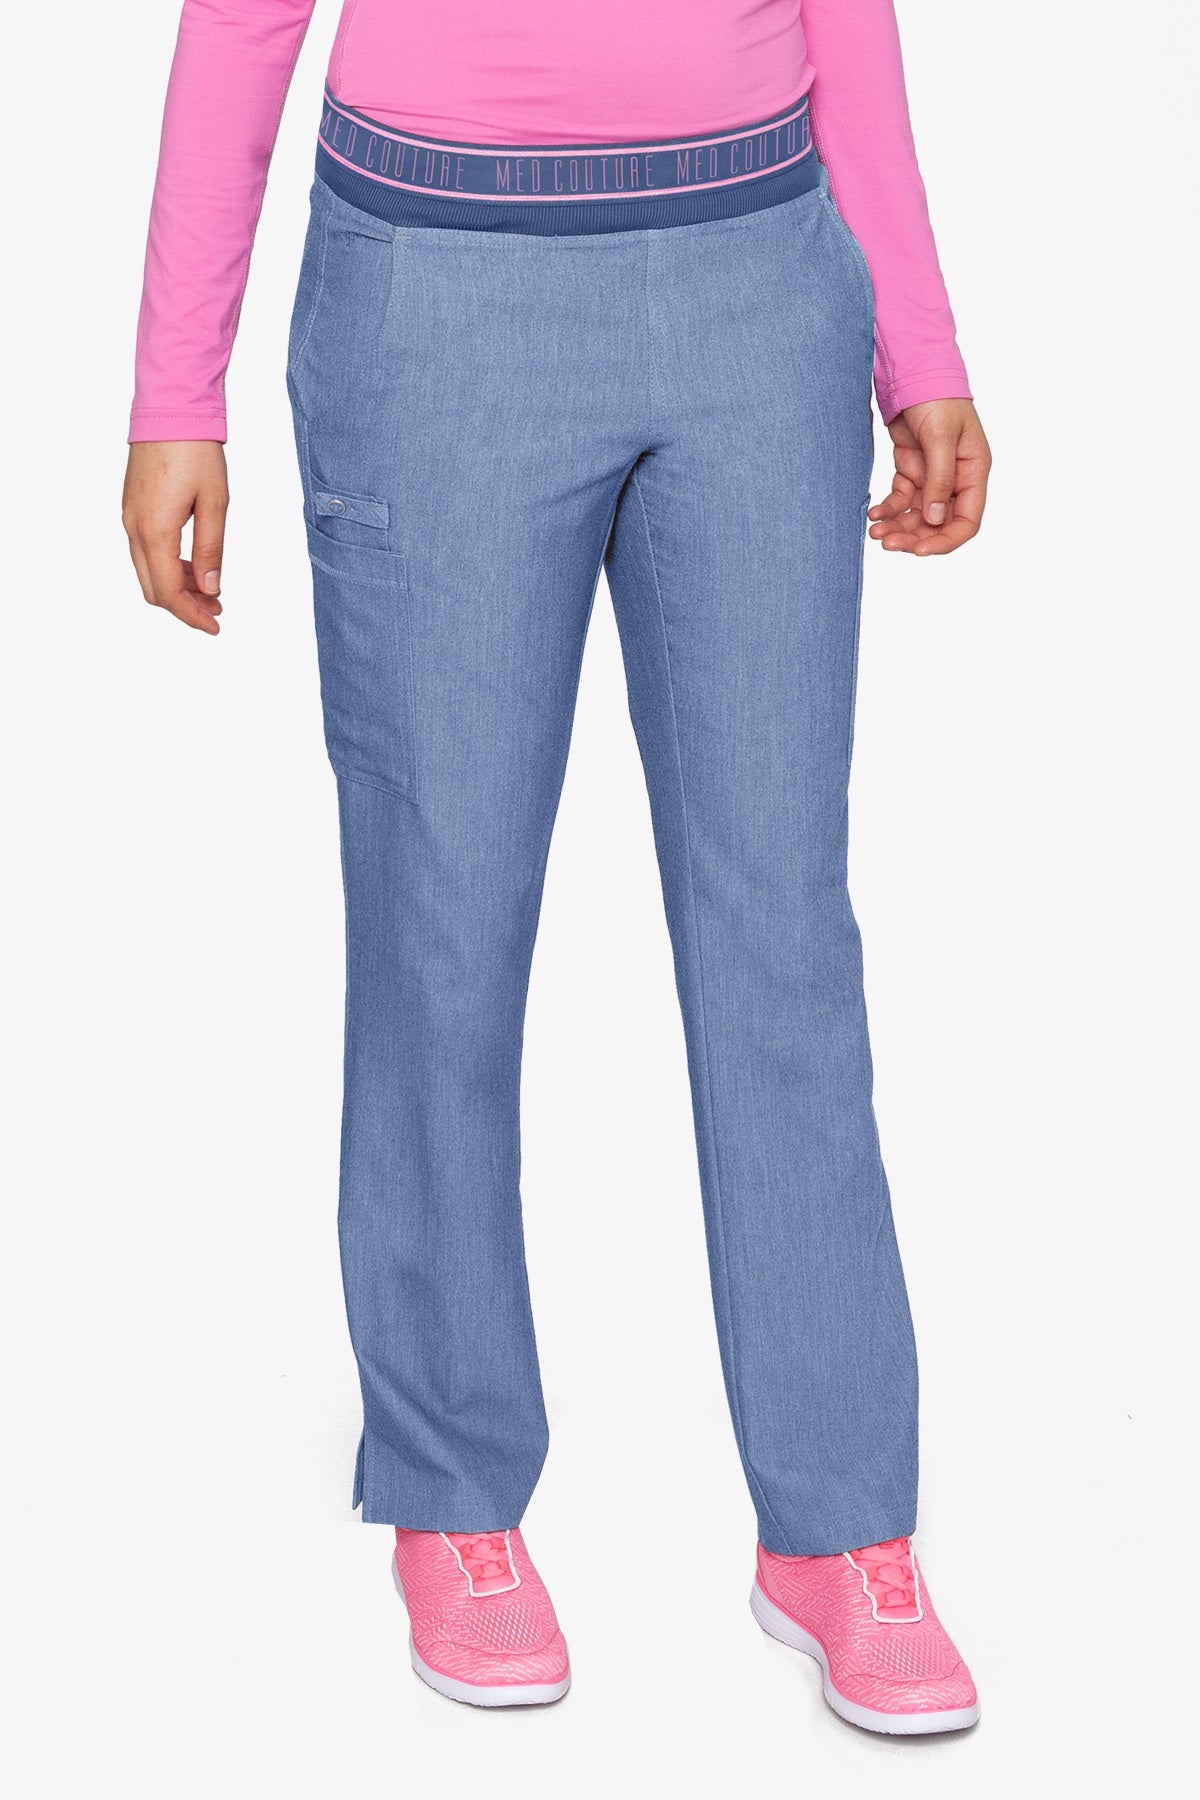 Med Couture Scrub Pants Touch Ally Yoga Pant in Blue Heather at Parker's Clothing and Shoes.